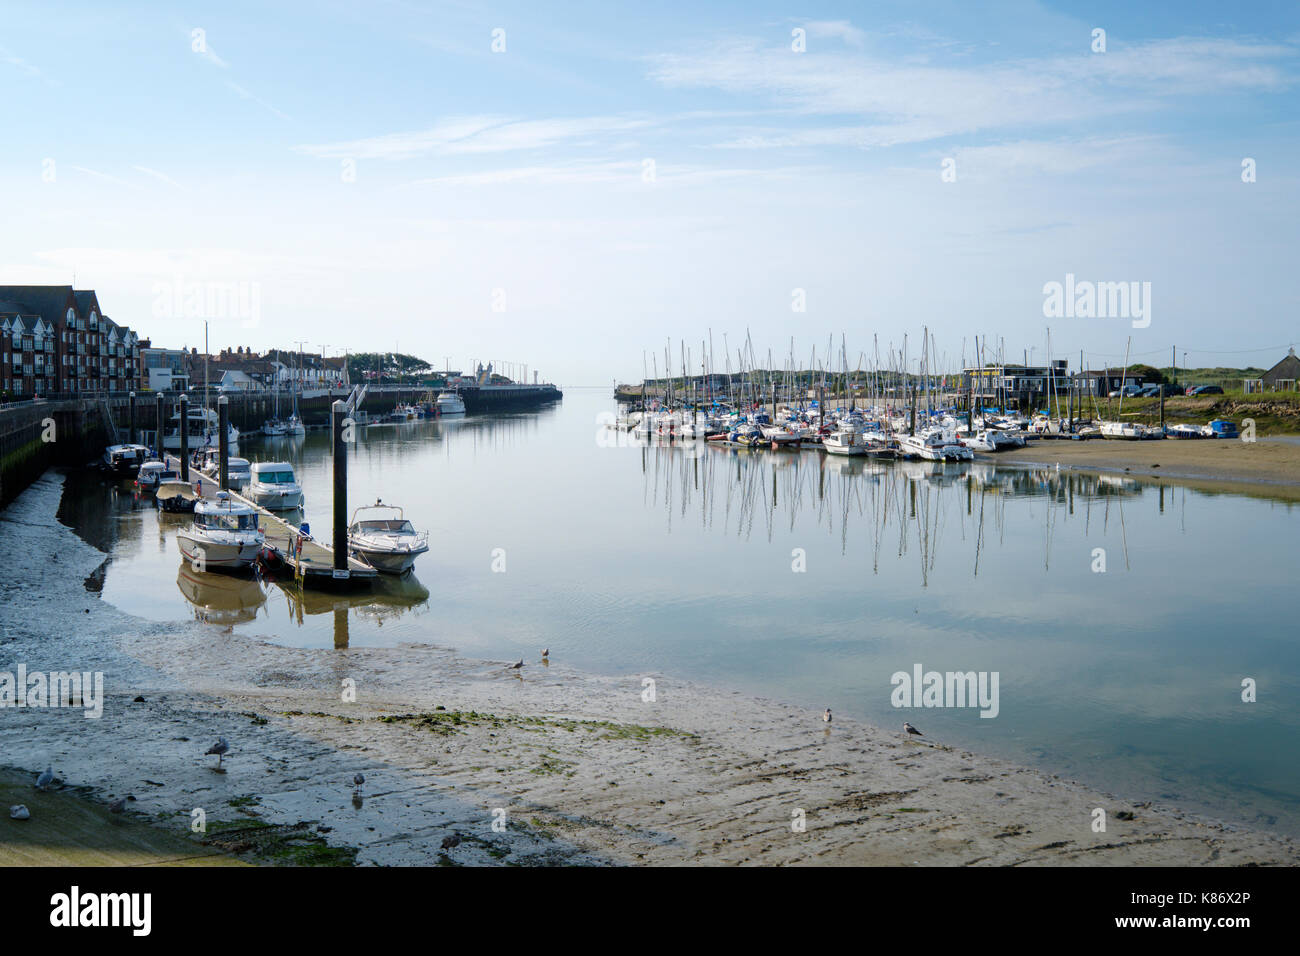 The Arun Yacht Club and the river Arun, Littlehampton, West Sussex, England, UK Stock Photo